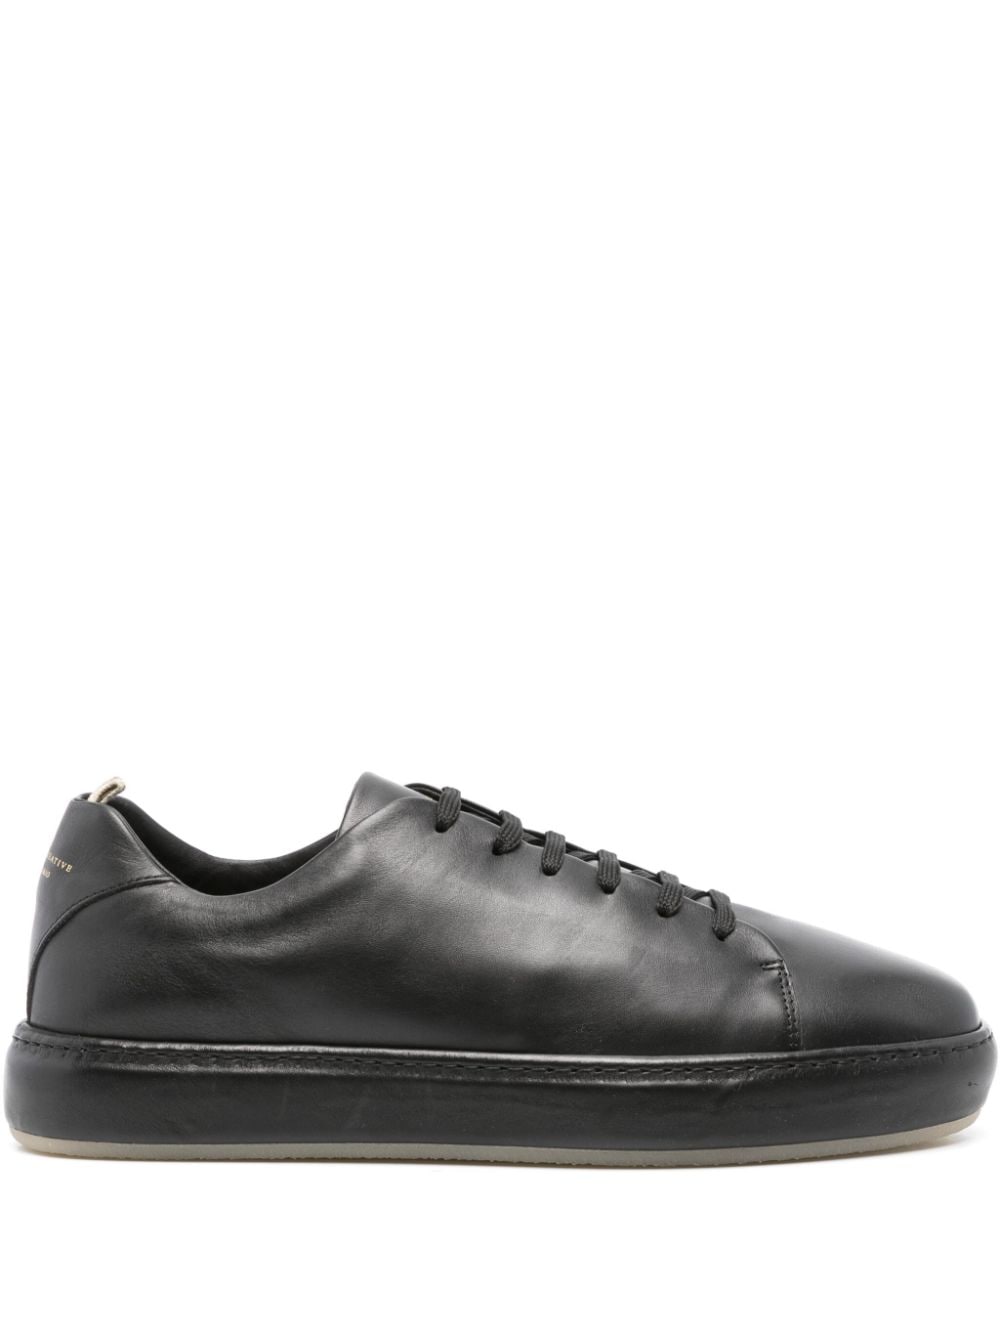 Officine Creative lace-up leather sneakers - Black von Officine Creative